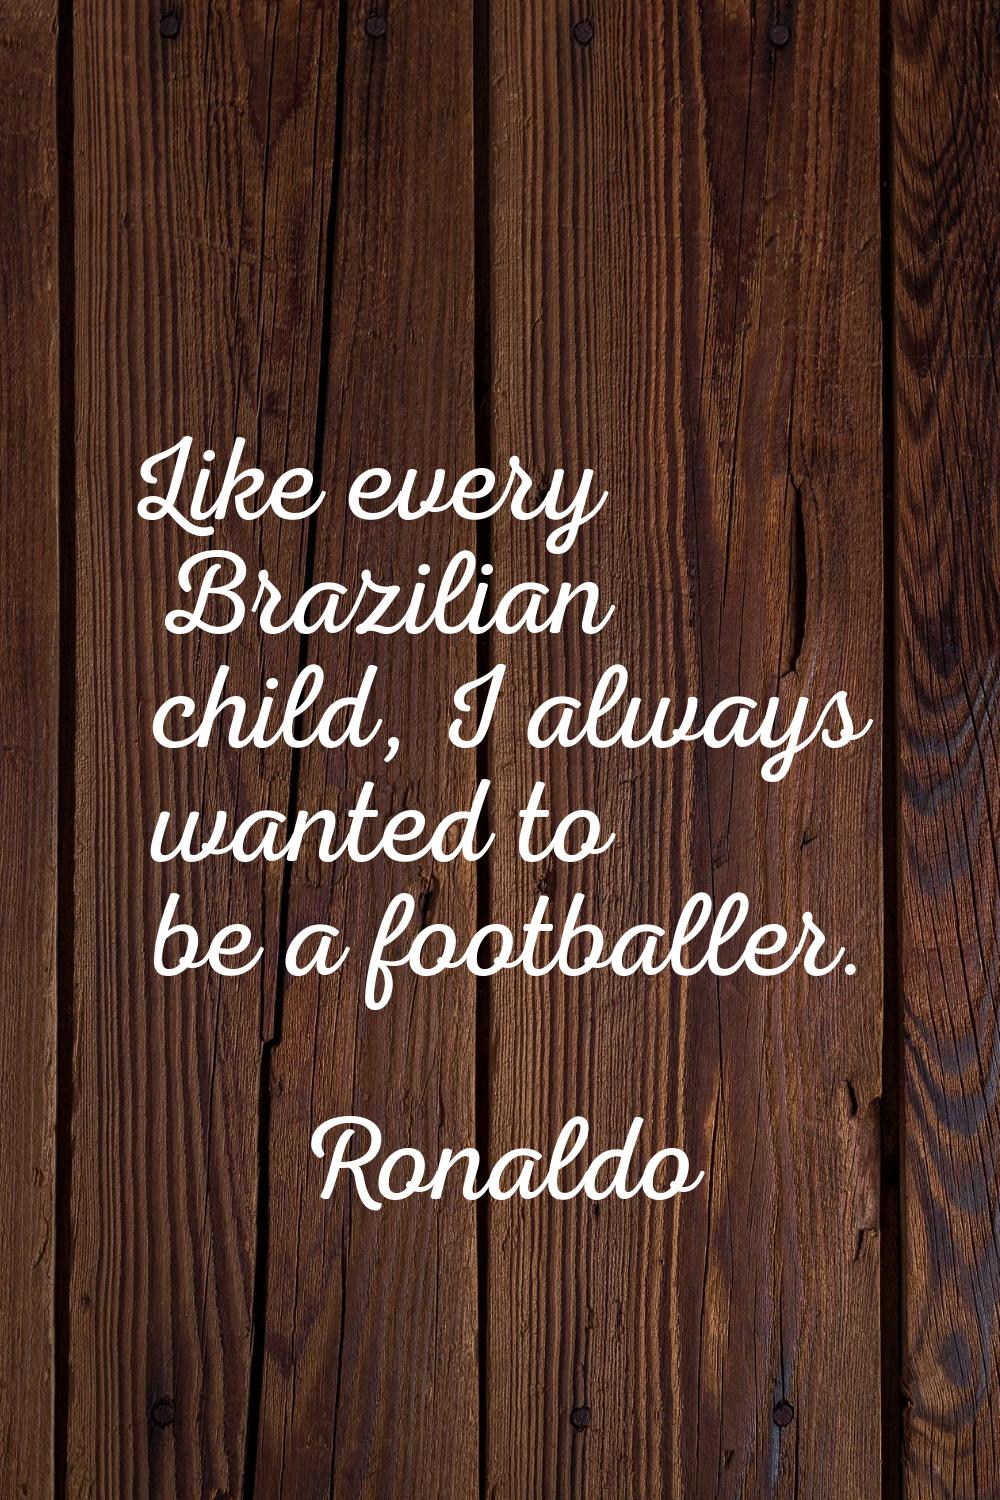 Like every Brazilian child, I always wanted to be a footballer.